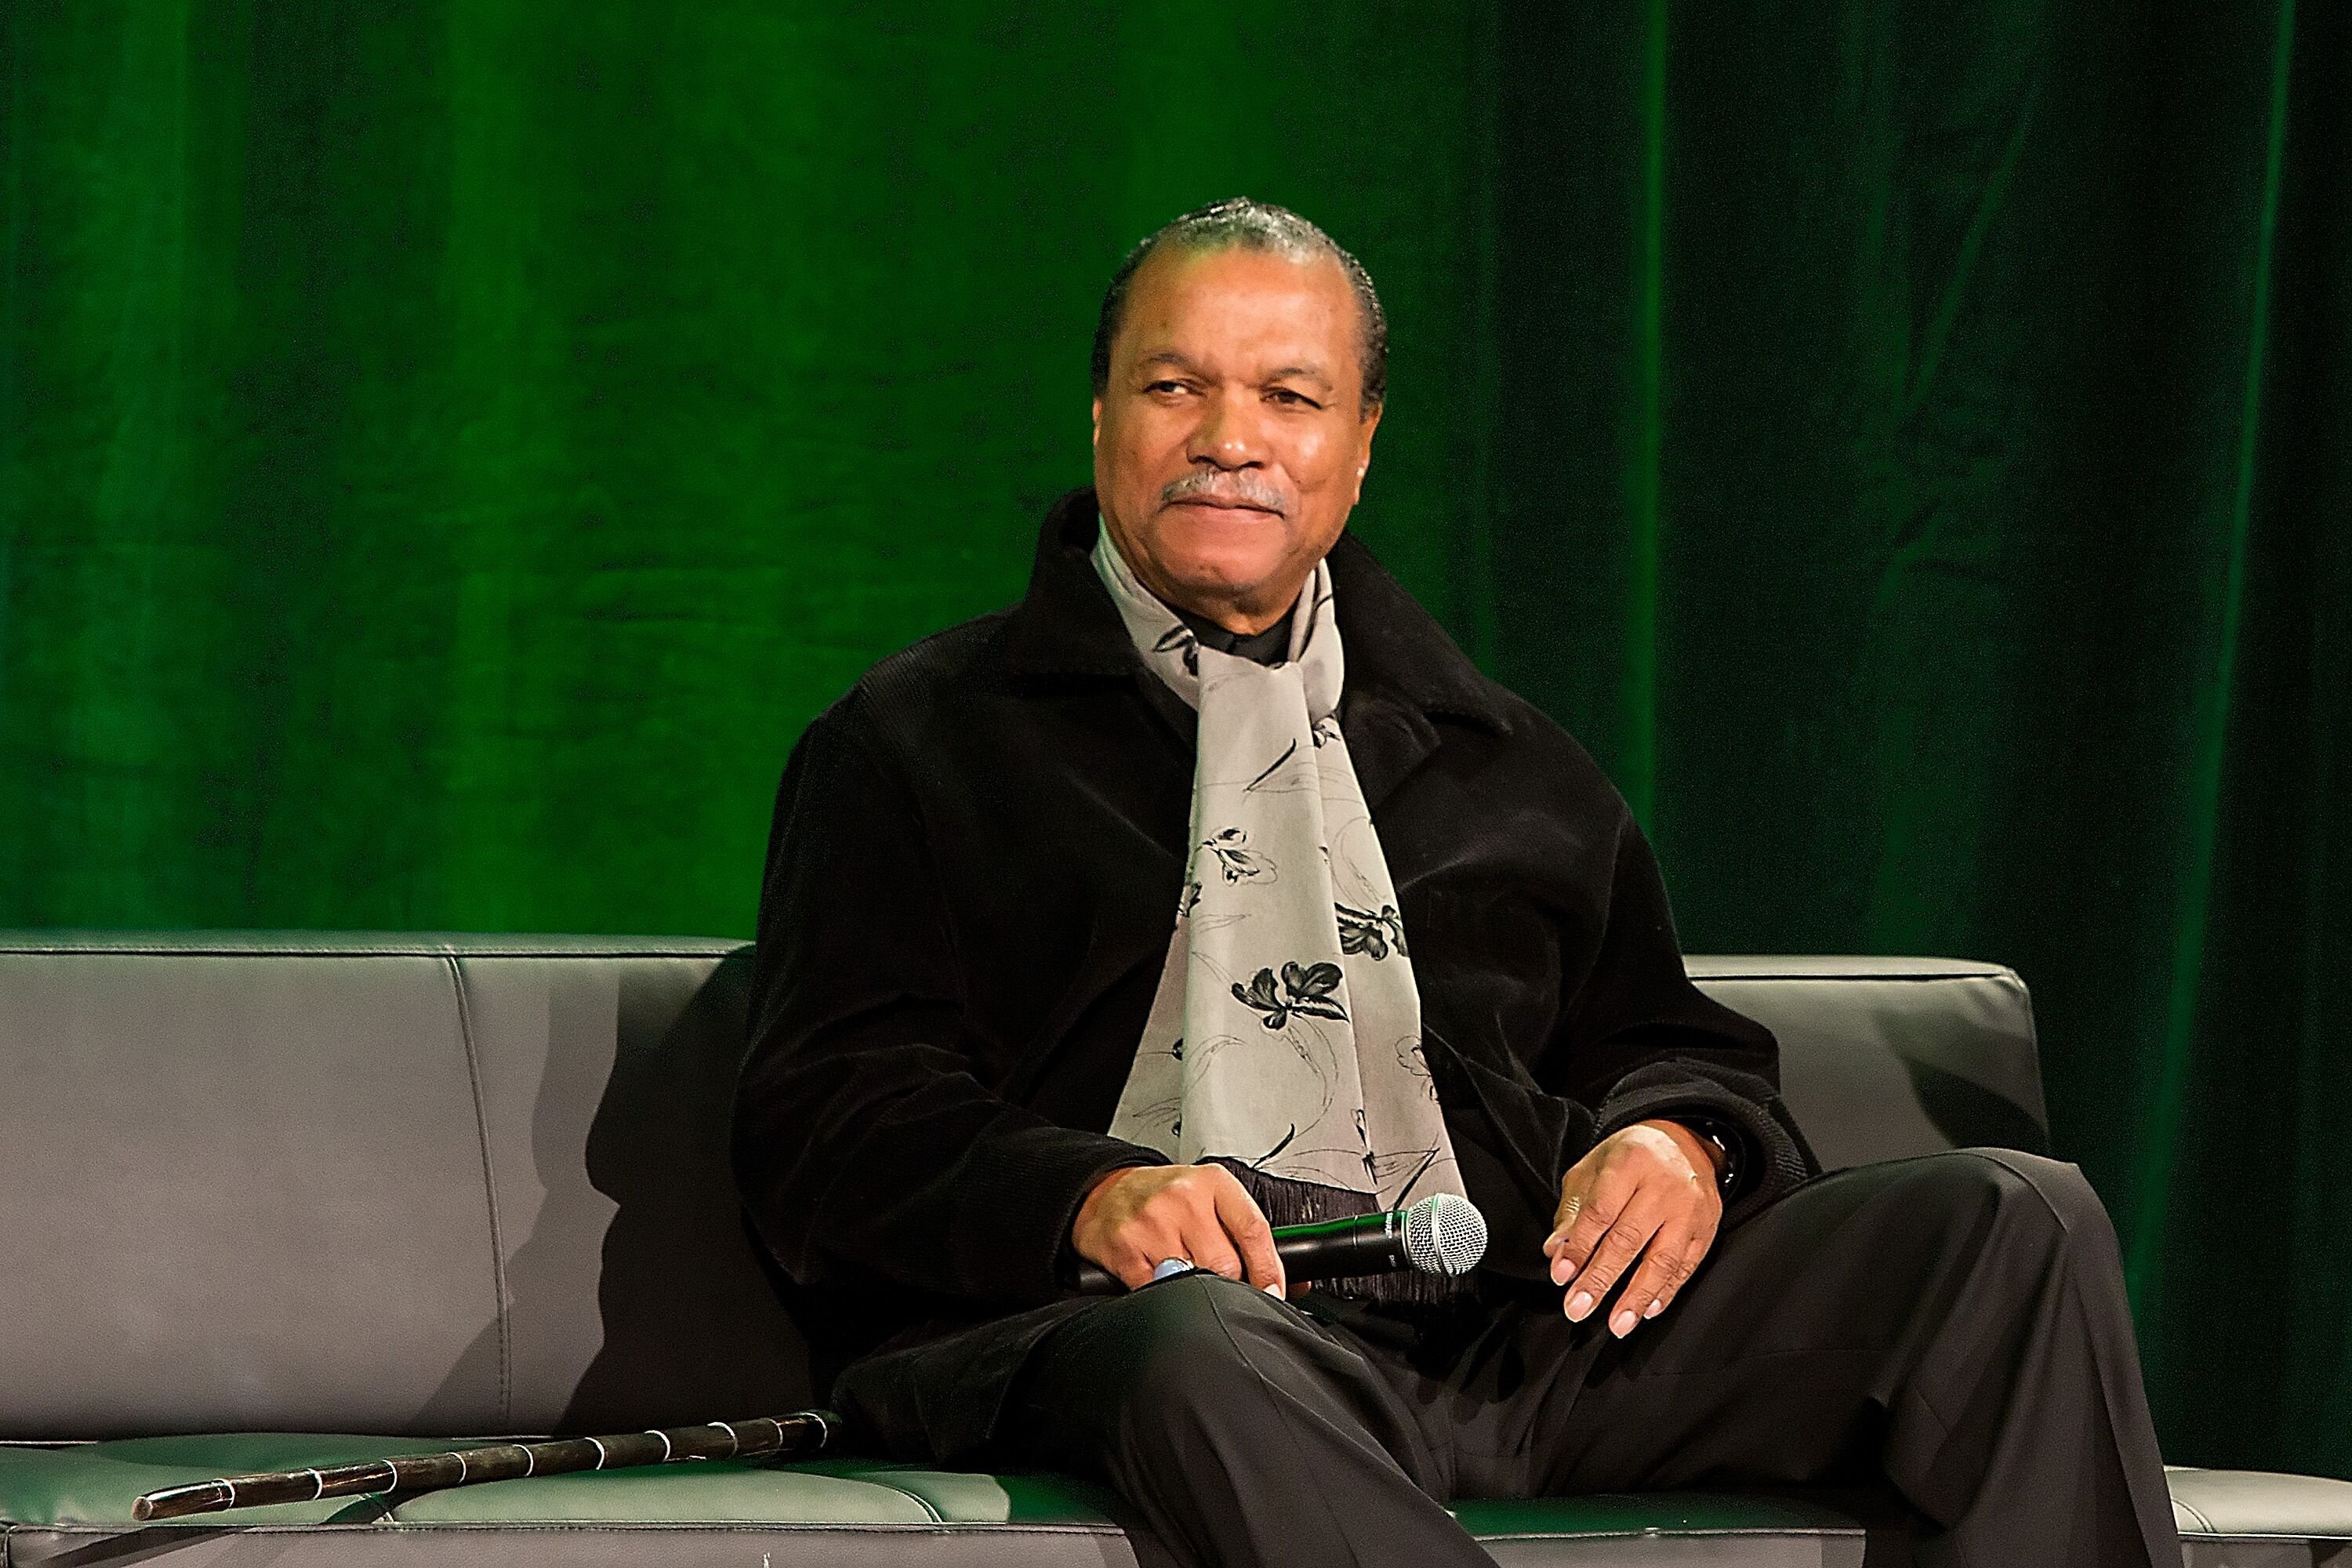 Billy Dee Williams attends a speaking engagement for "Star Wars" on December 14, 2015. | Photo: Getty Images